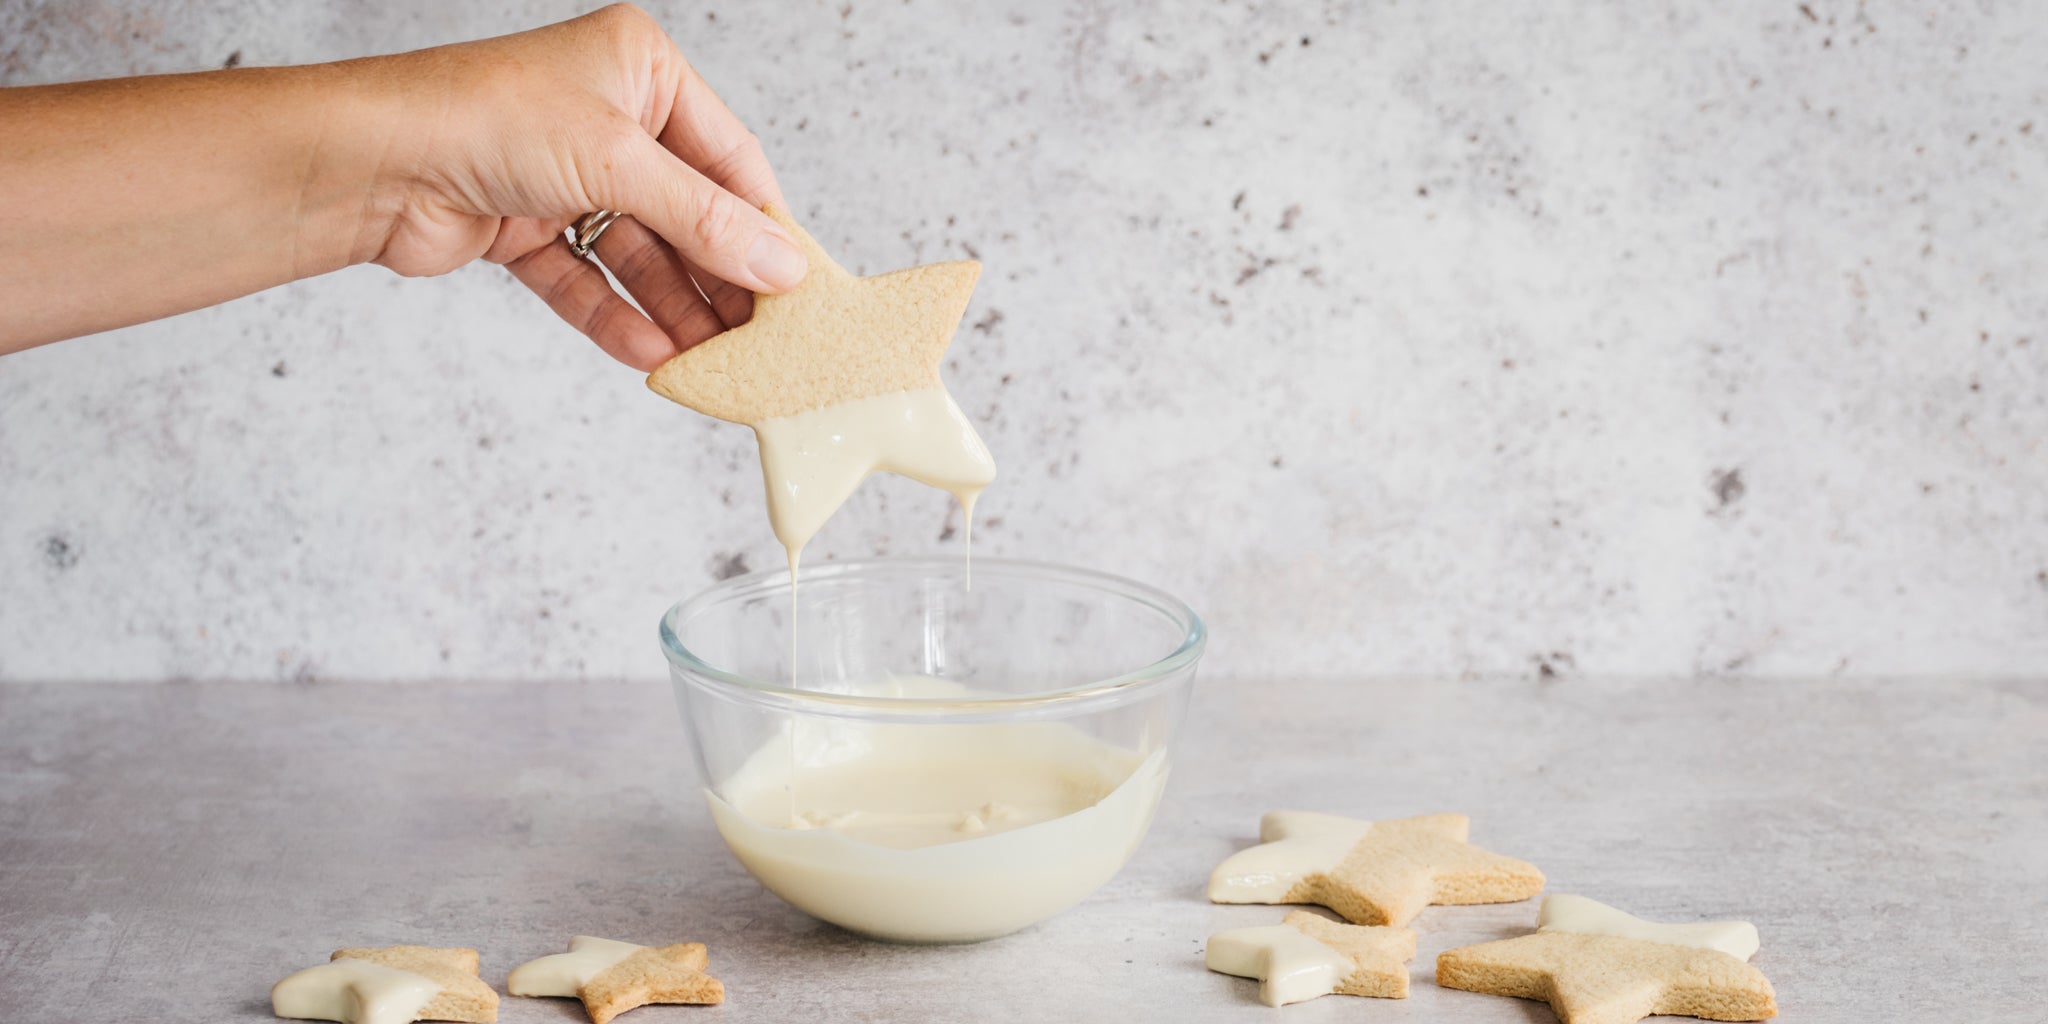 Hand dipping star biscuits into a glass bowl of melted white chocolate